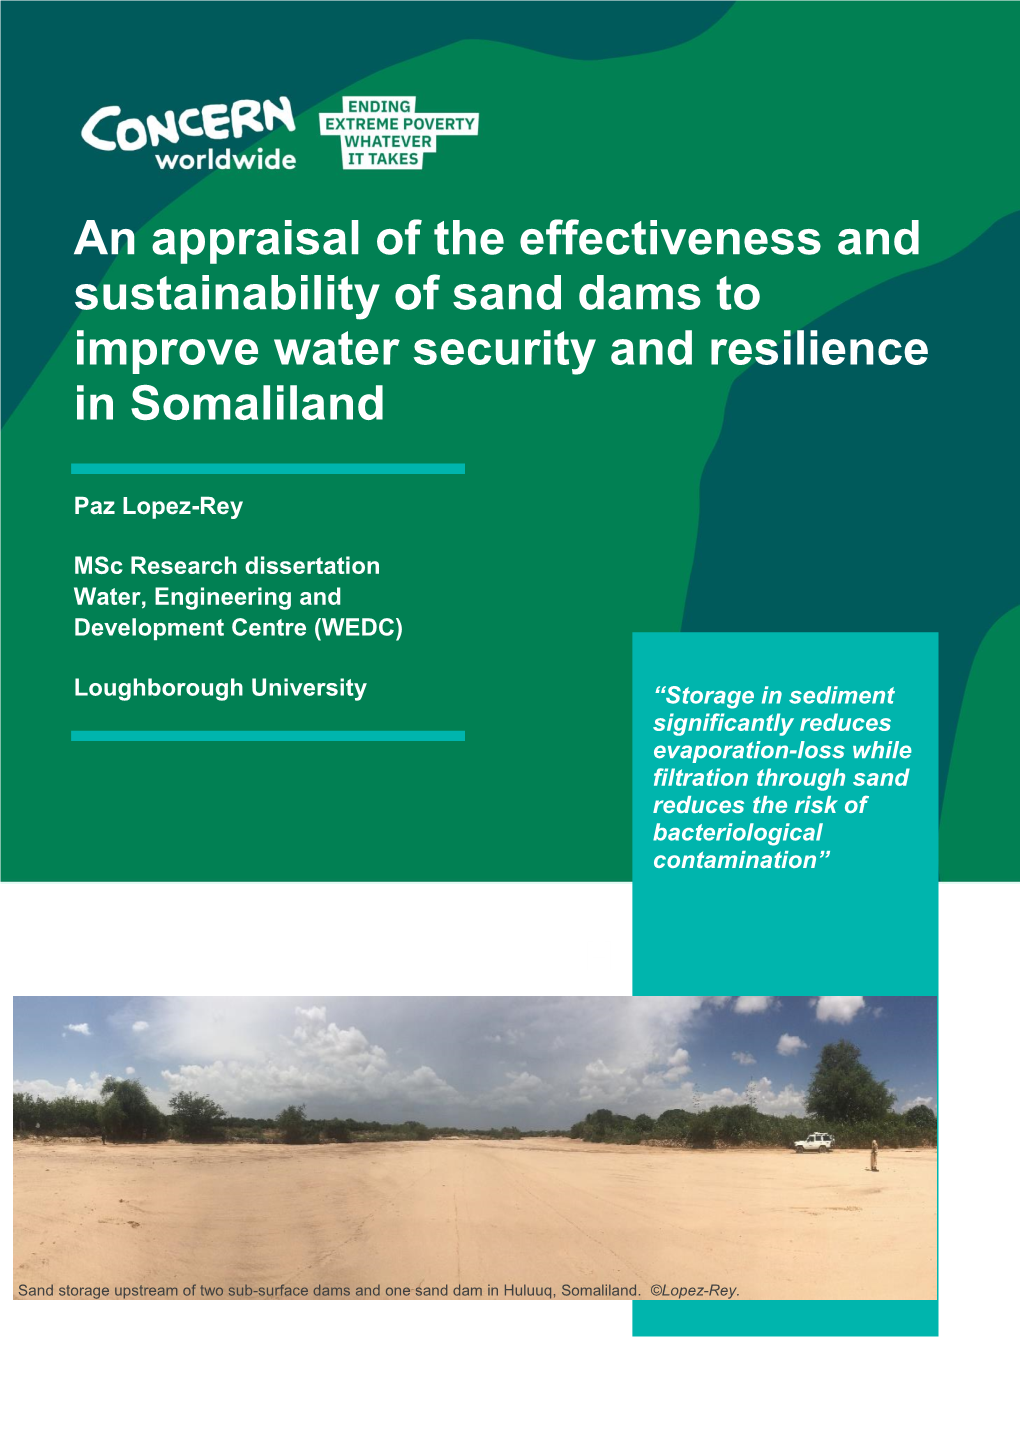 An Appraisal of the Effectiveness and Sustainability of Sand Dams to Improve Water Security and Resilience in Somaliland